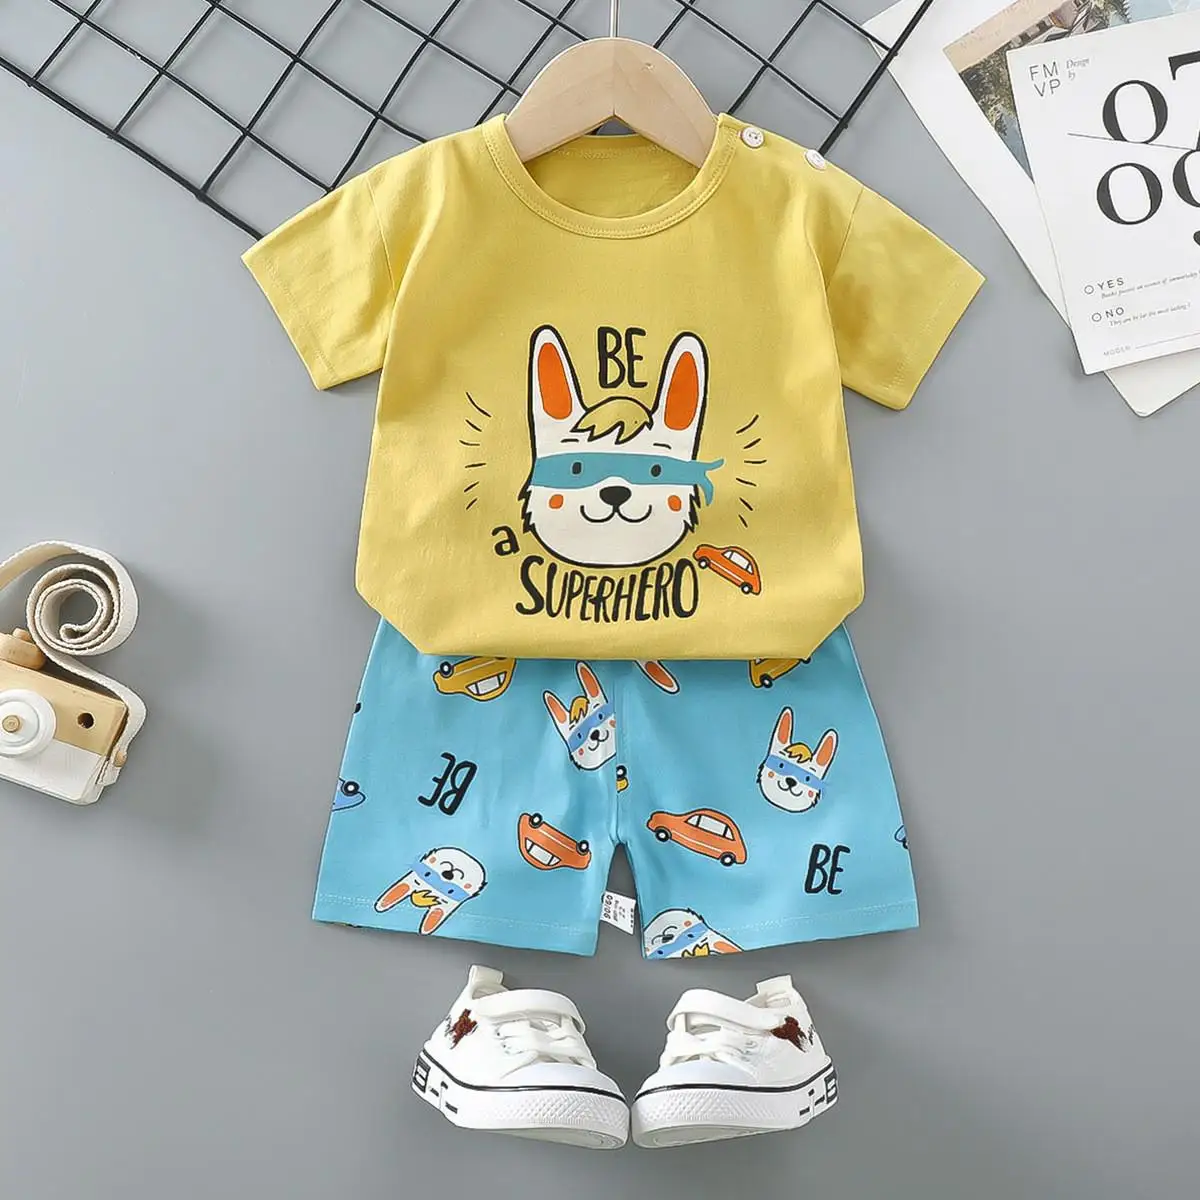 small baby clothing set	 New Trend Summer Children's Clothing Sets Kids Fashion Short-sleeved T-shit+ Shorts 2pcs Baby Boys Girls Cotton Tracksuits Baby Clothing Set luxury Baby Clothing Set